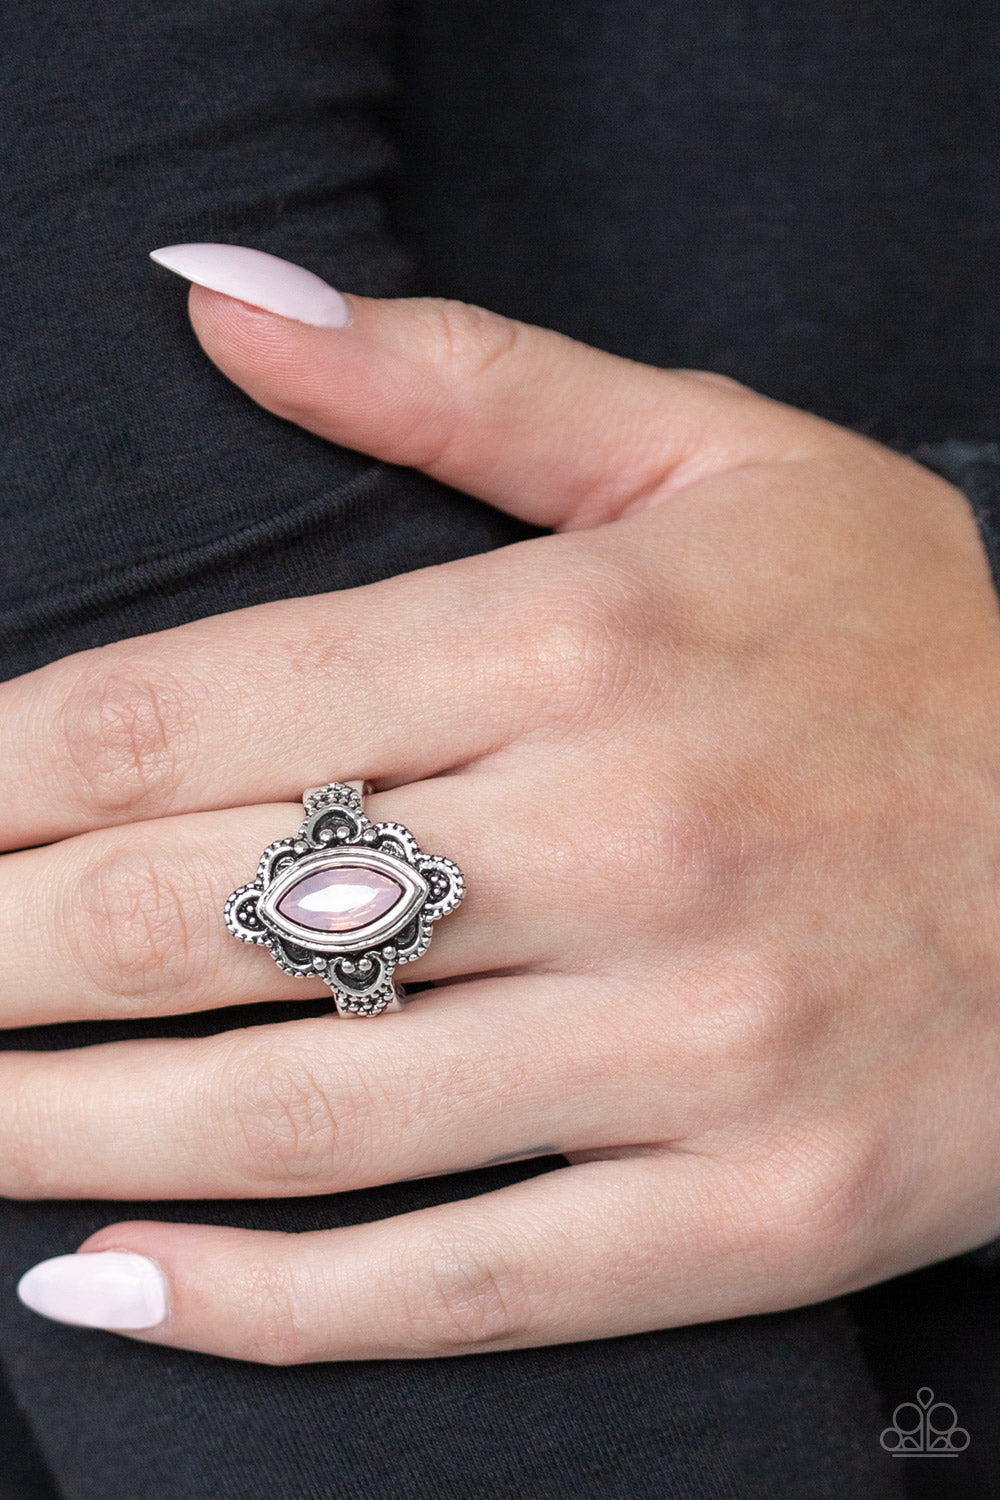 GLASS HALF-COLORFUL - PINK OPALESCENT RING